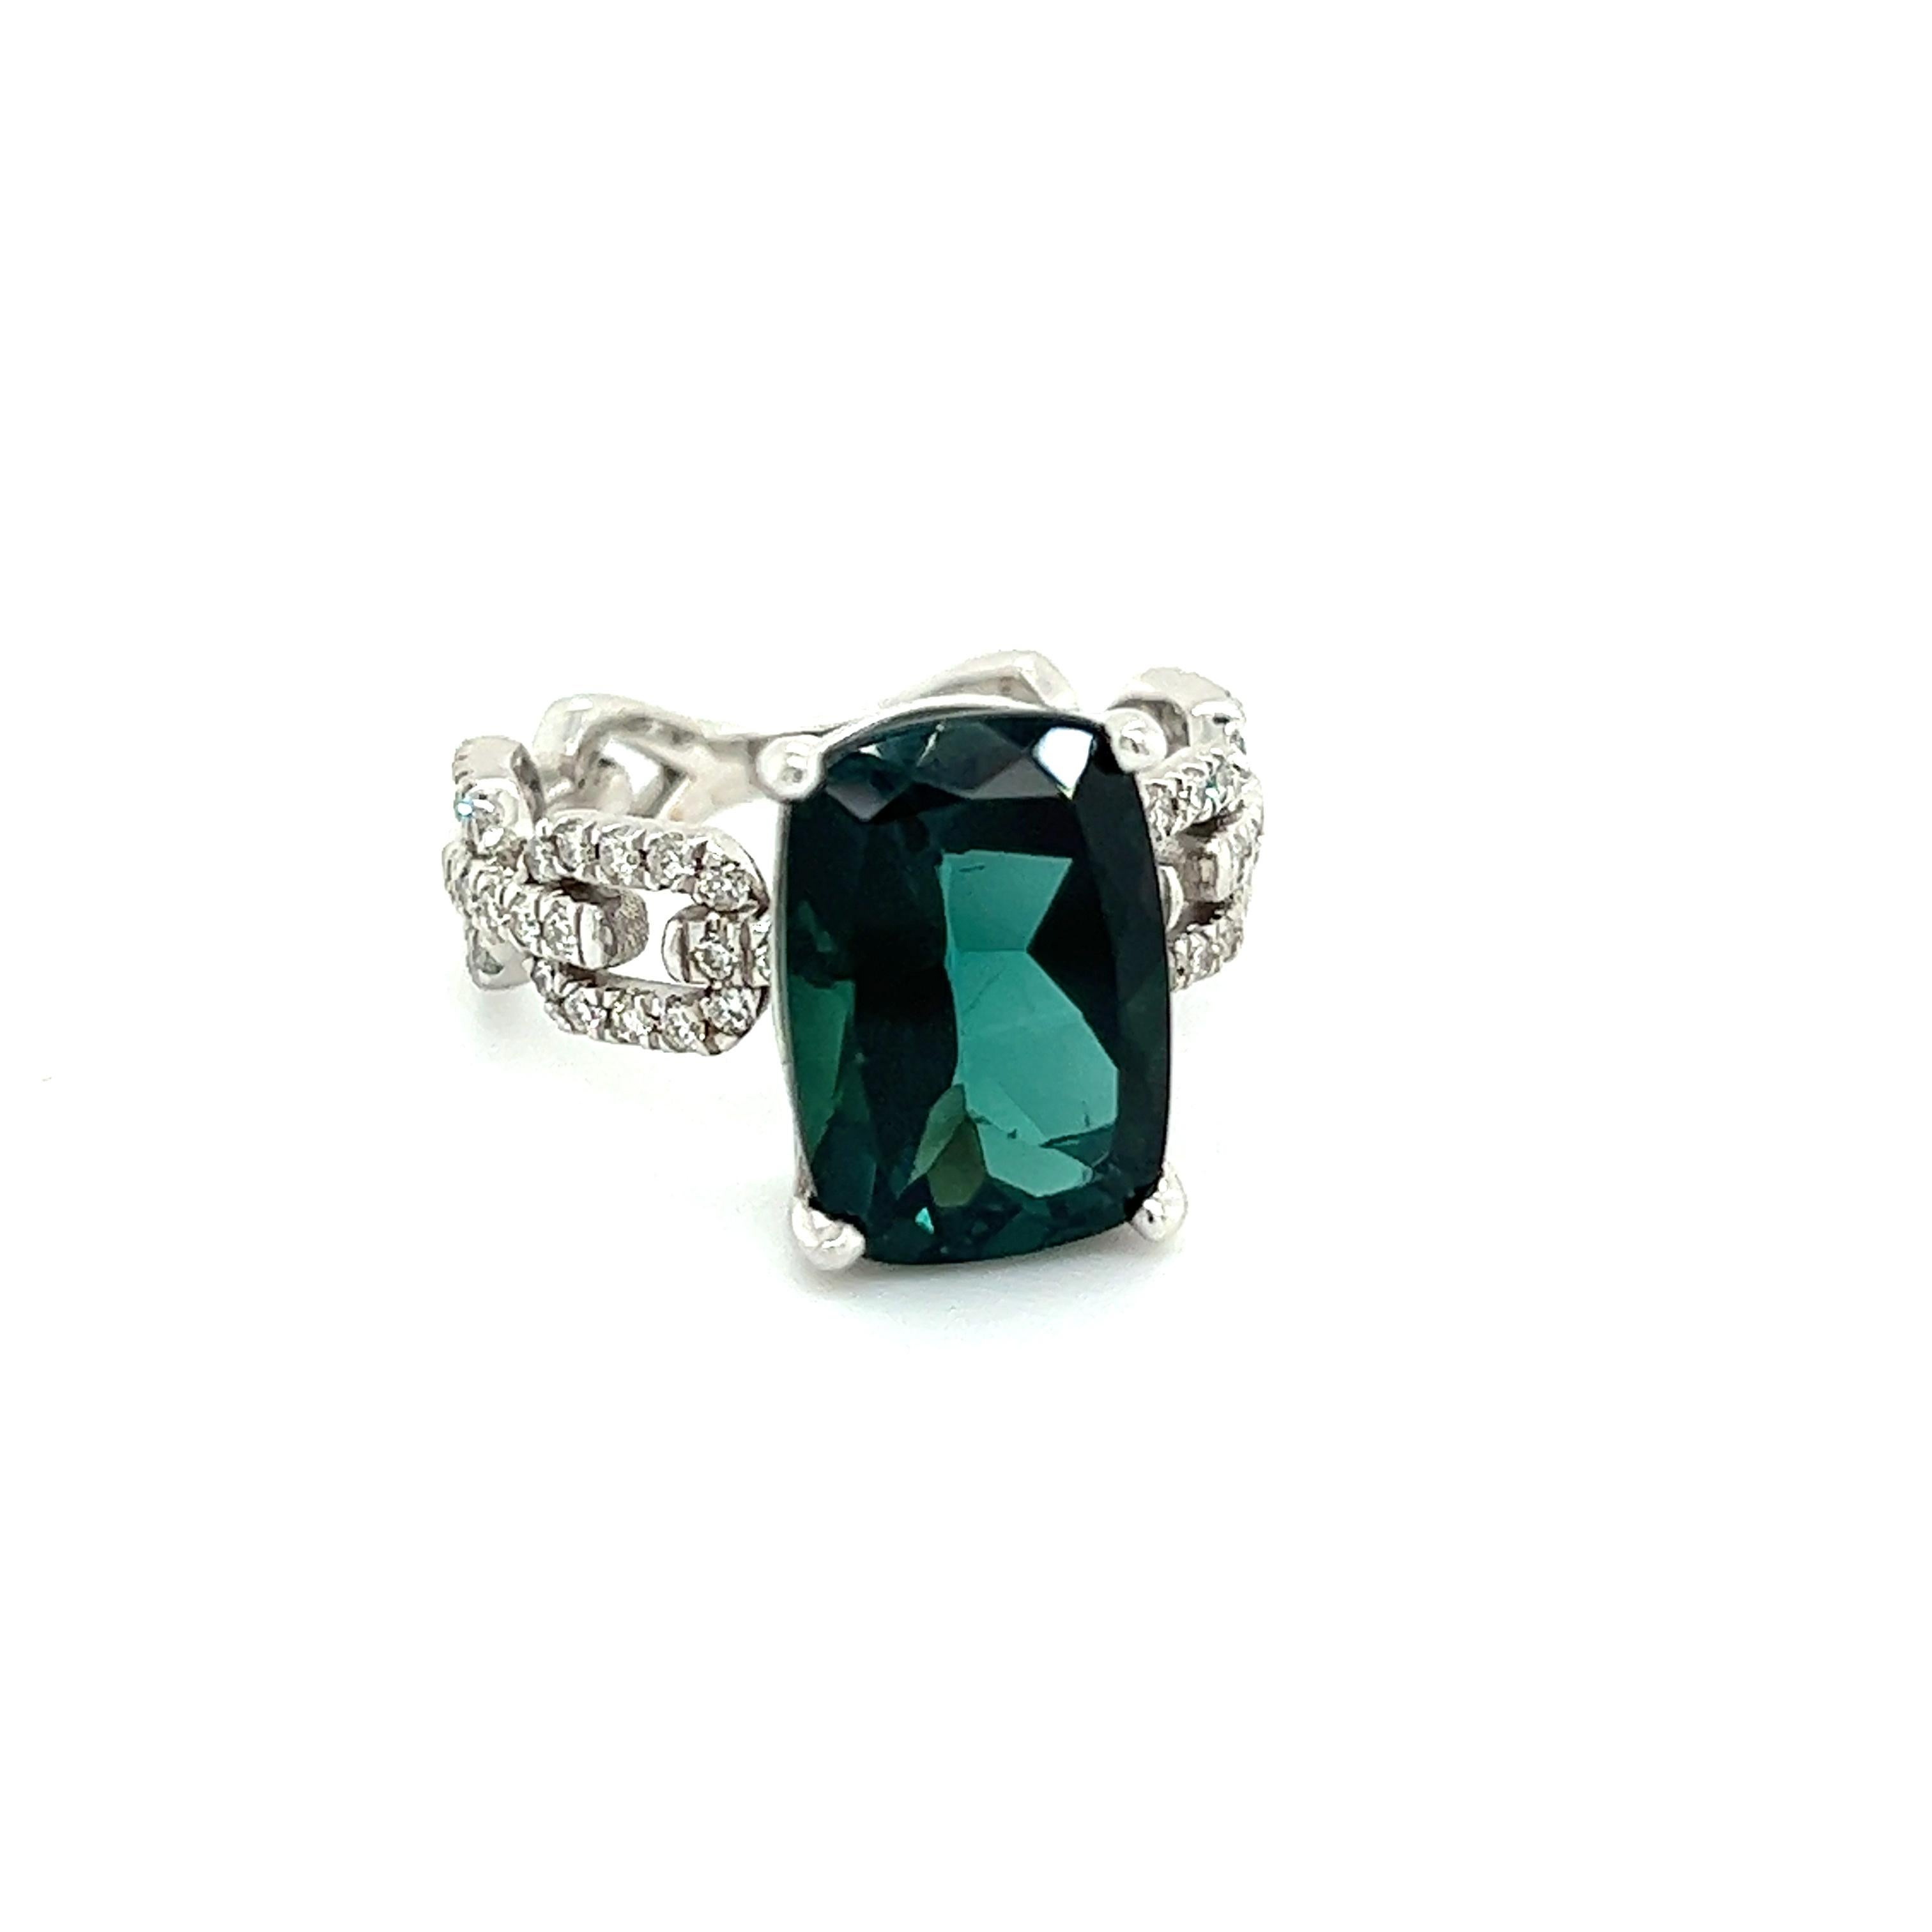 Natural Tourmaline Diamond Ring 6.5 14k White Gold 6.32 TCW Certified For Sale 2